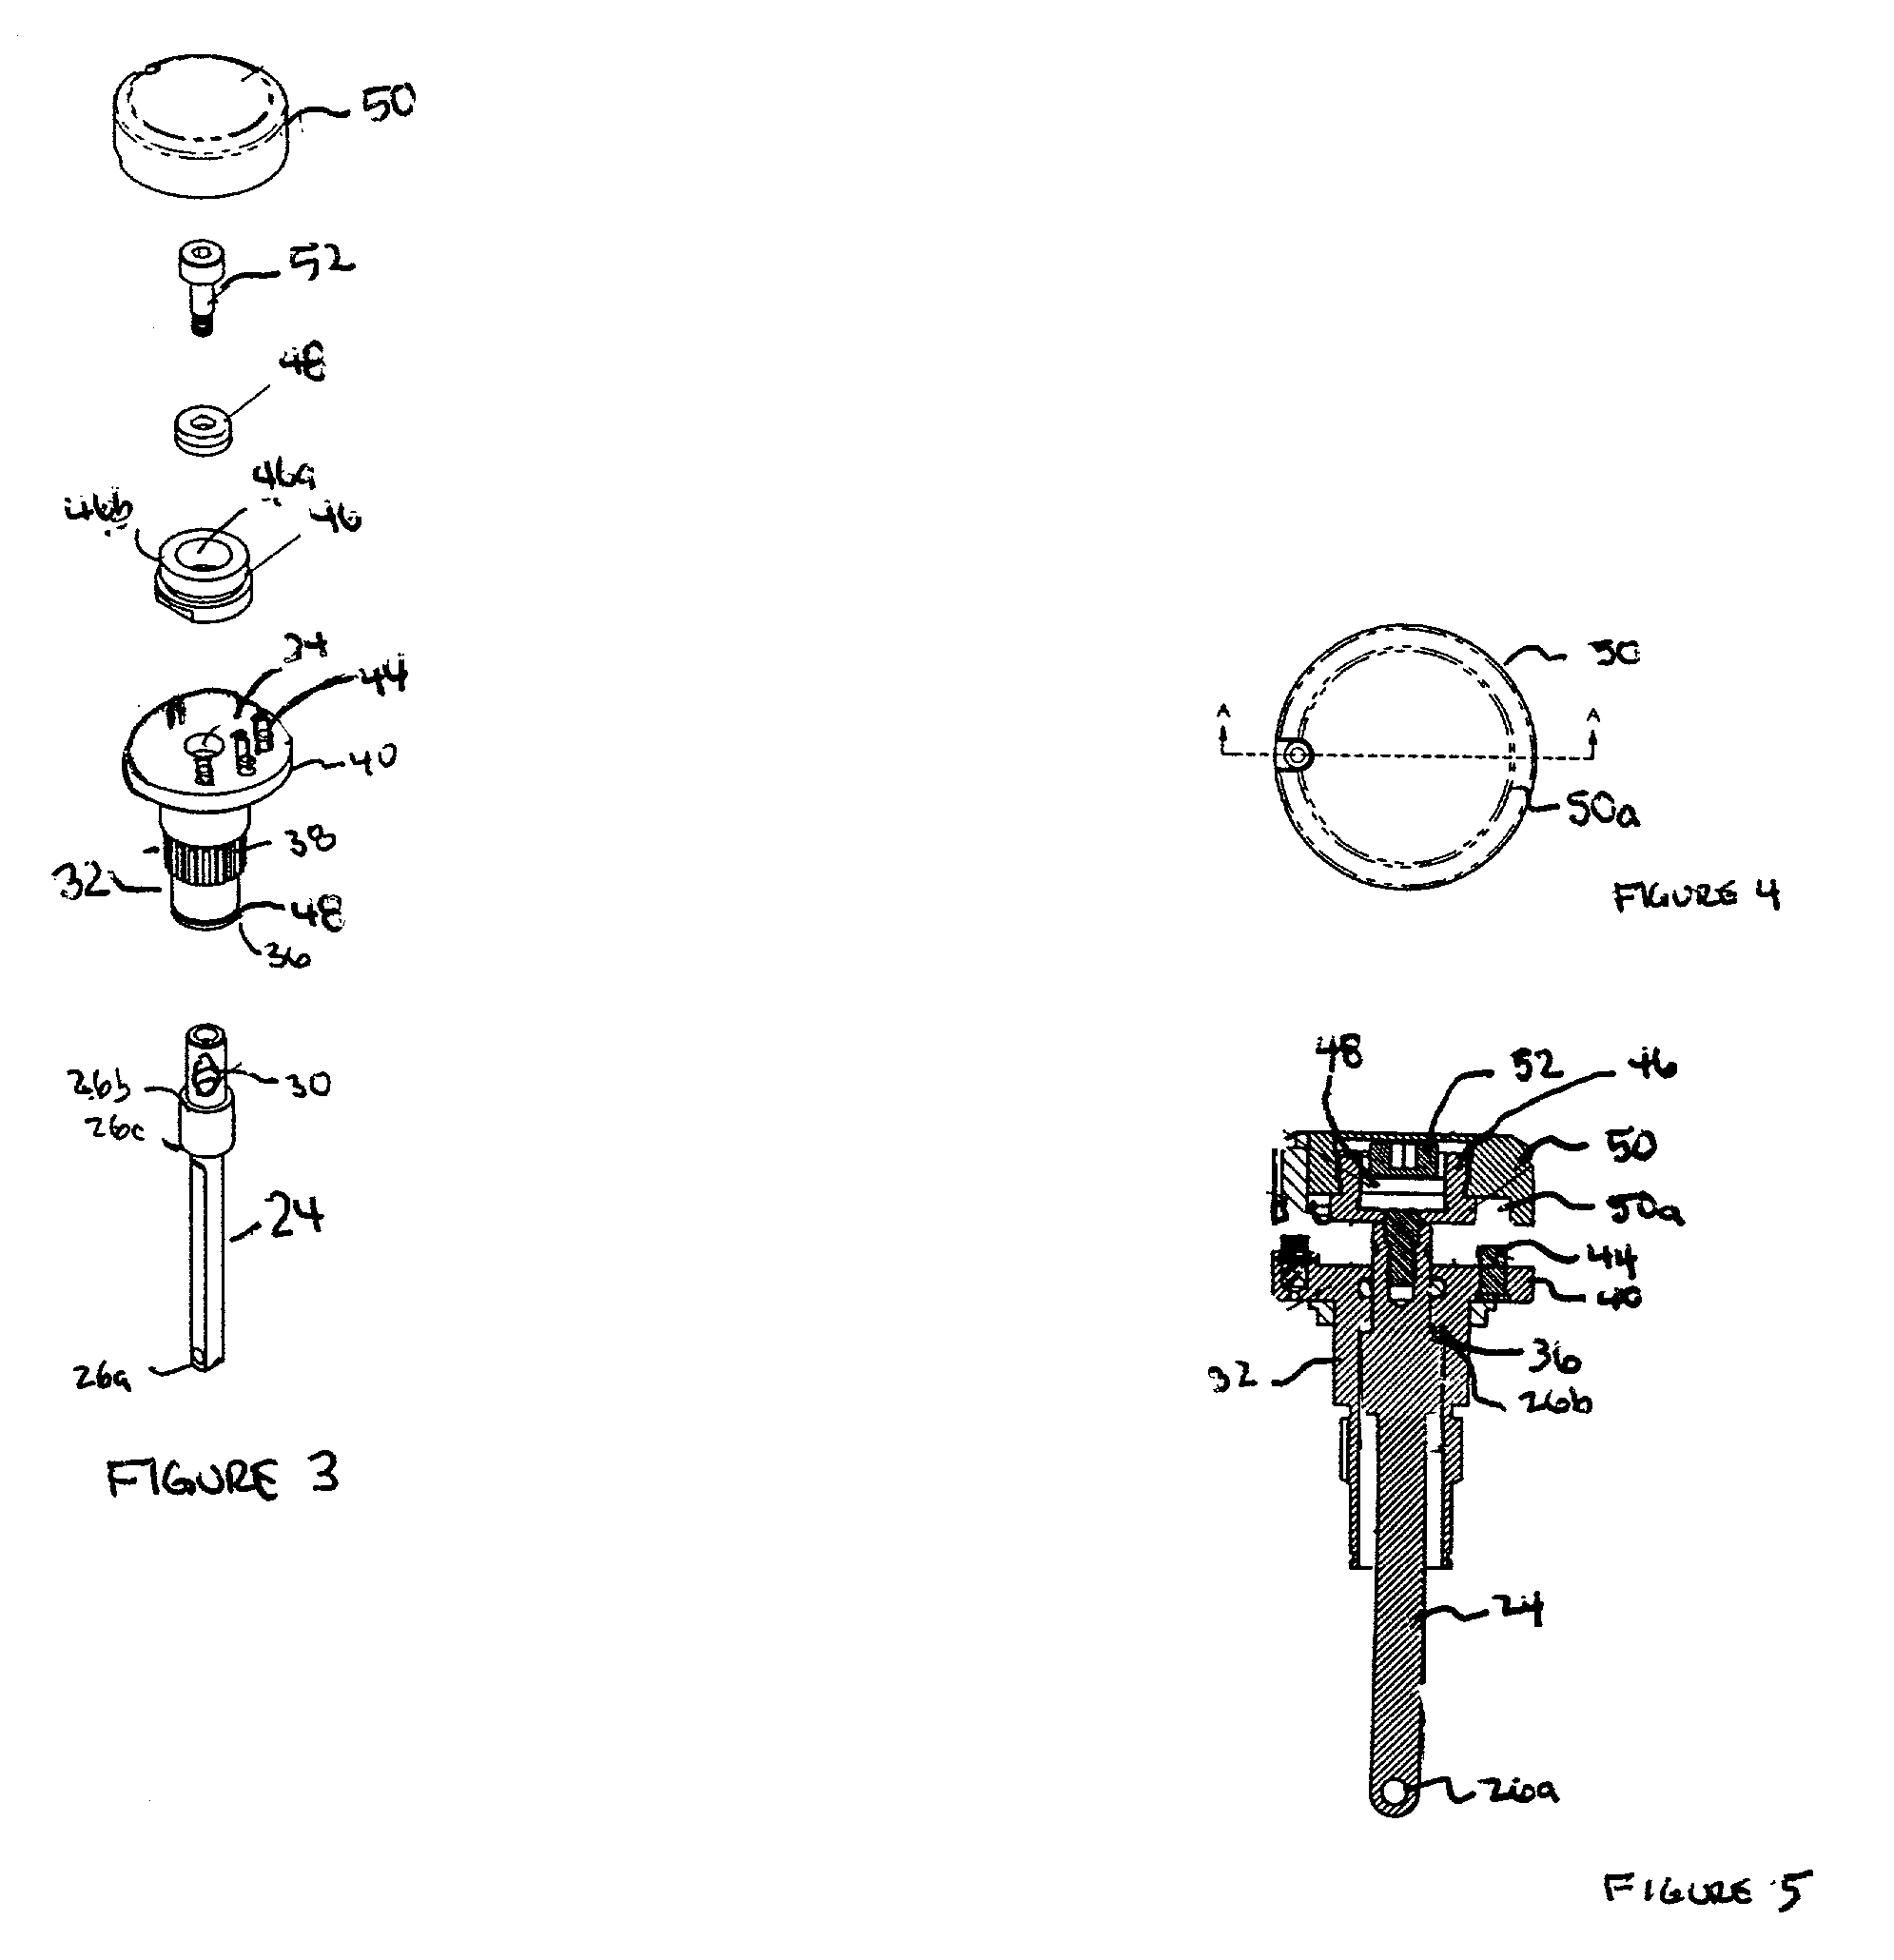 Connector assembly for a surgical tool